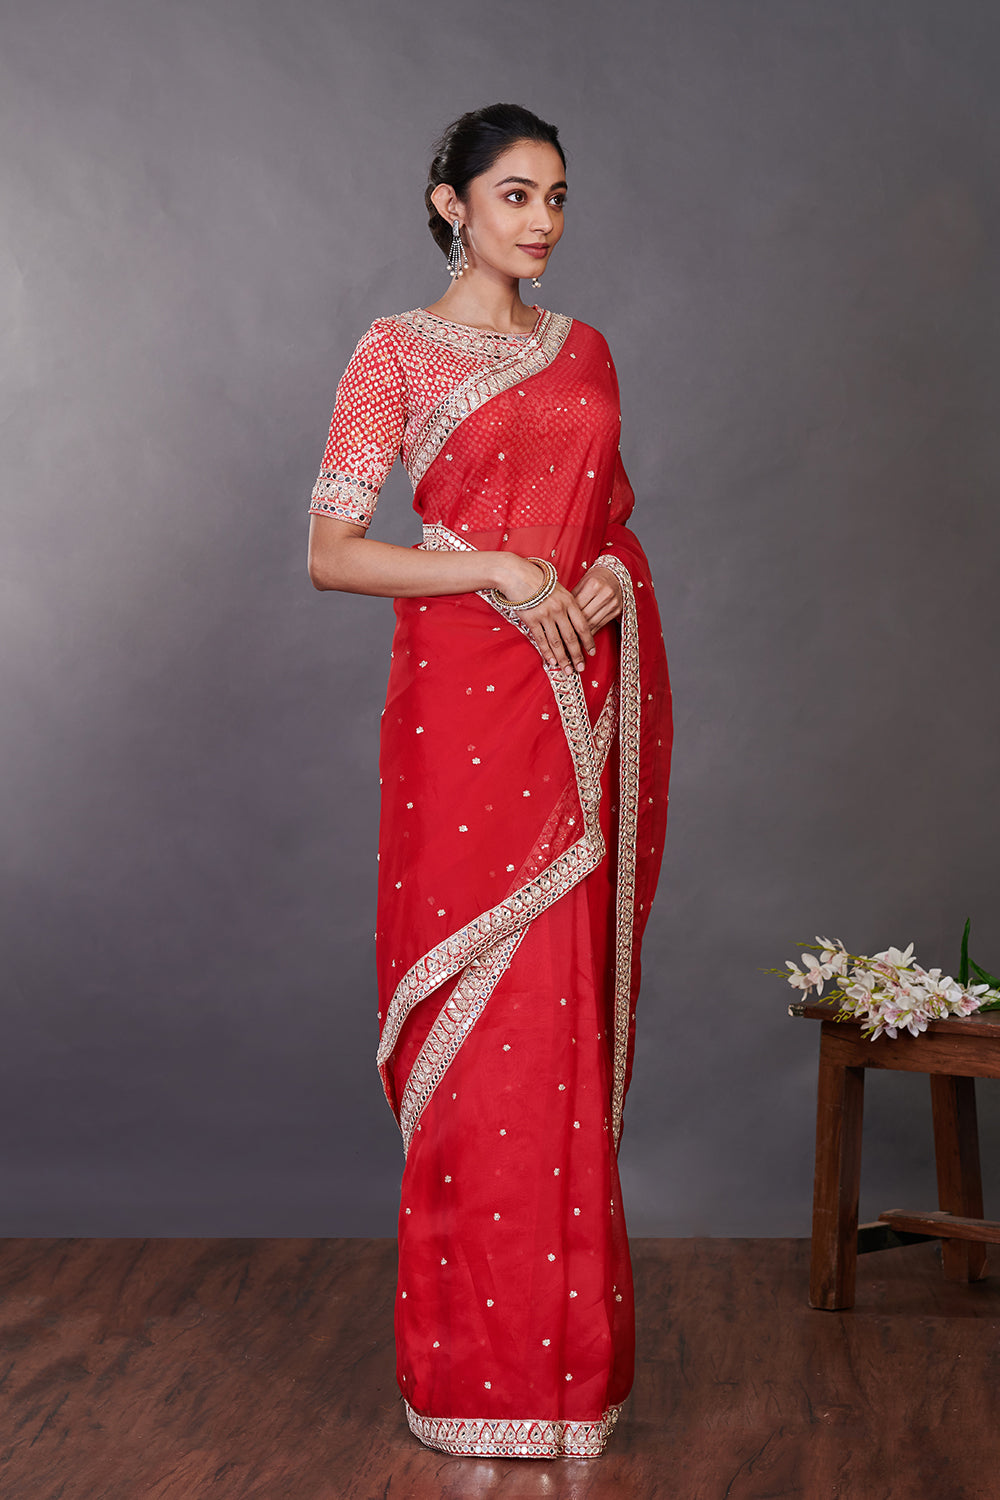 Shop red mirror work organza sari online in USA with designer blouse. Make a fashion statement on festive occasions and weddings with designer sarees, designer suits, Indian dresses, Anarkali suits, palazzo suits, designer gowns, sharara suits, embroidered sarees from Pure Elegance Indian fashion store in USA.-side